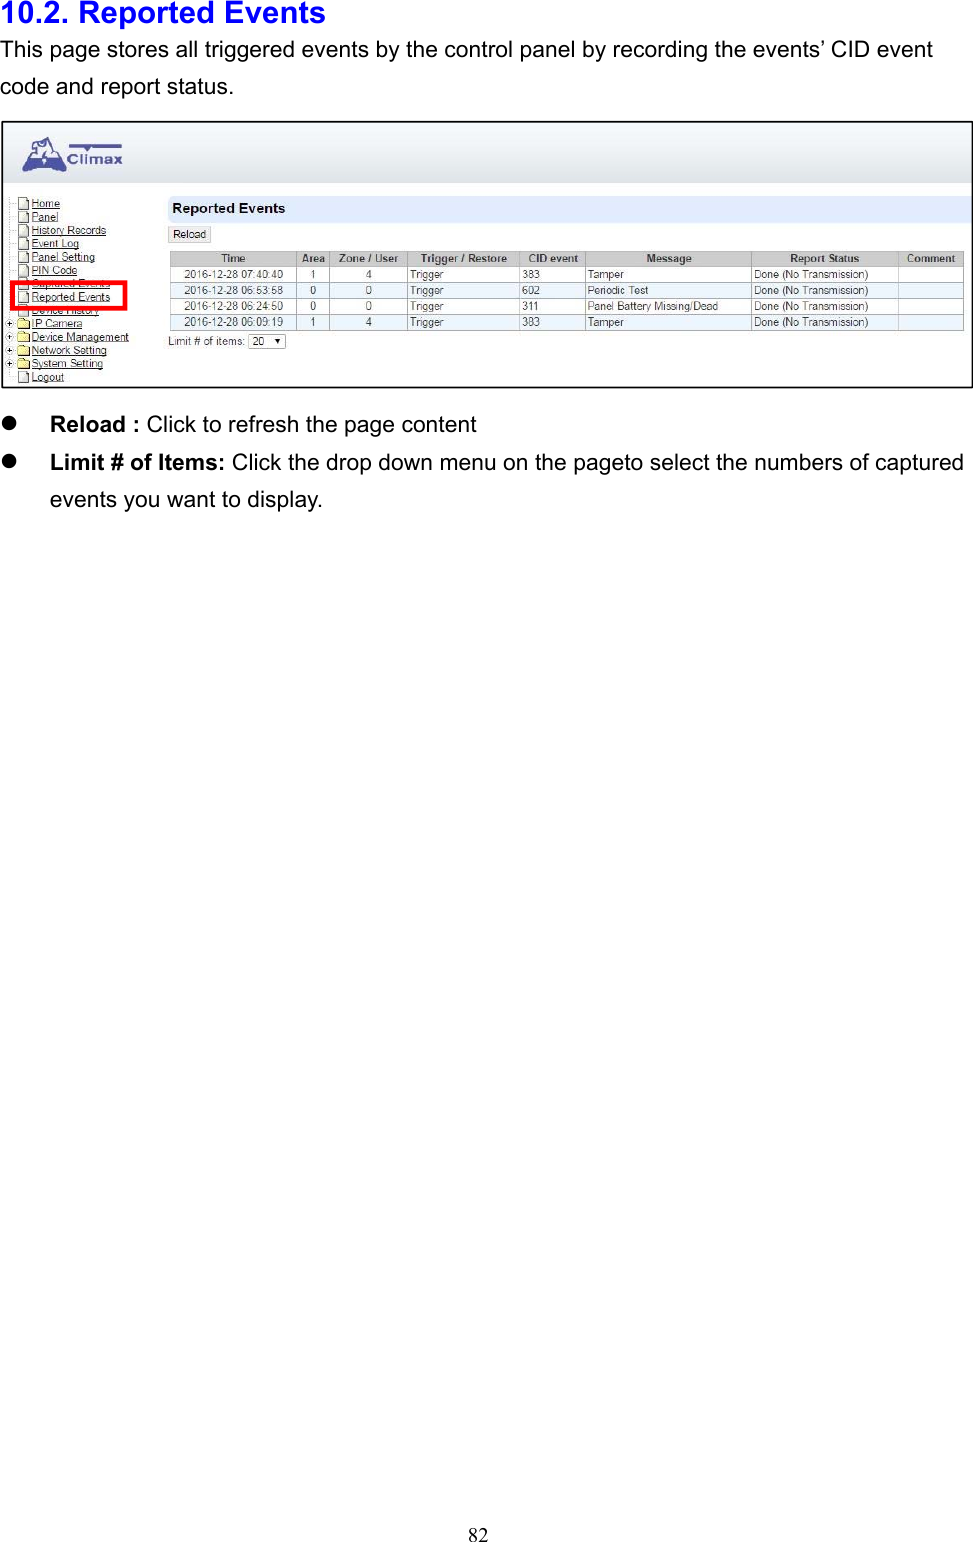  8210.2. Reported Events     This page stores all triggered events by the control panel by recording the events’ CID event code and report status.   Reload : Click to refresh the page content      Limit # of Items: Click the drop down menu on the pageto select the numbers of captured events you want to display.                 